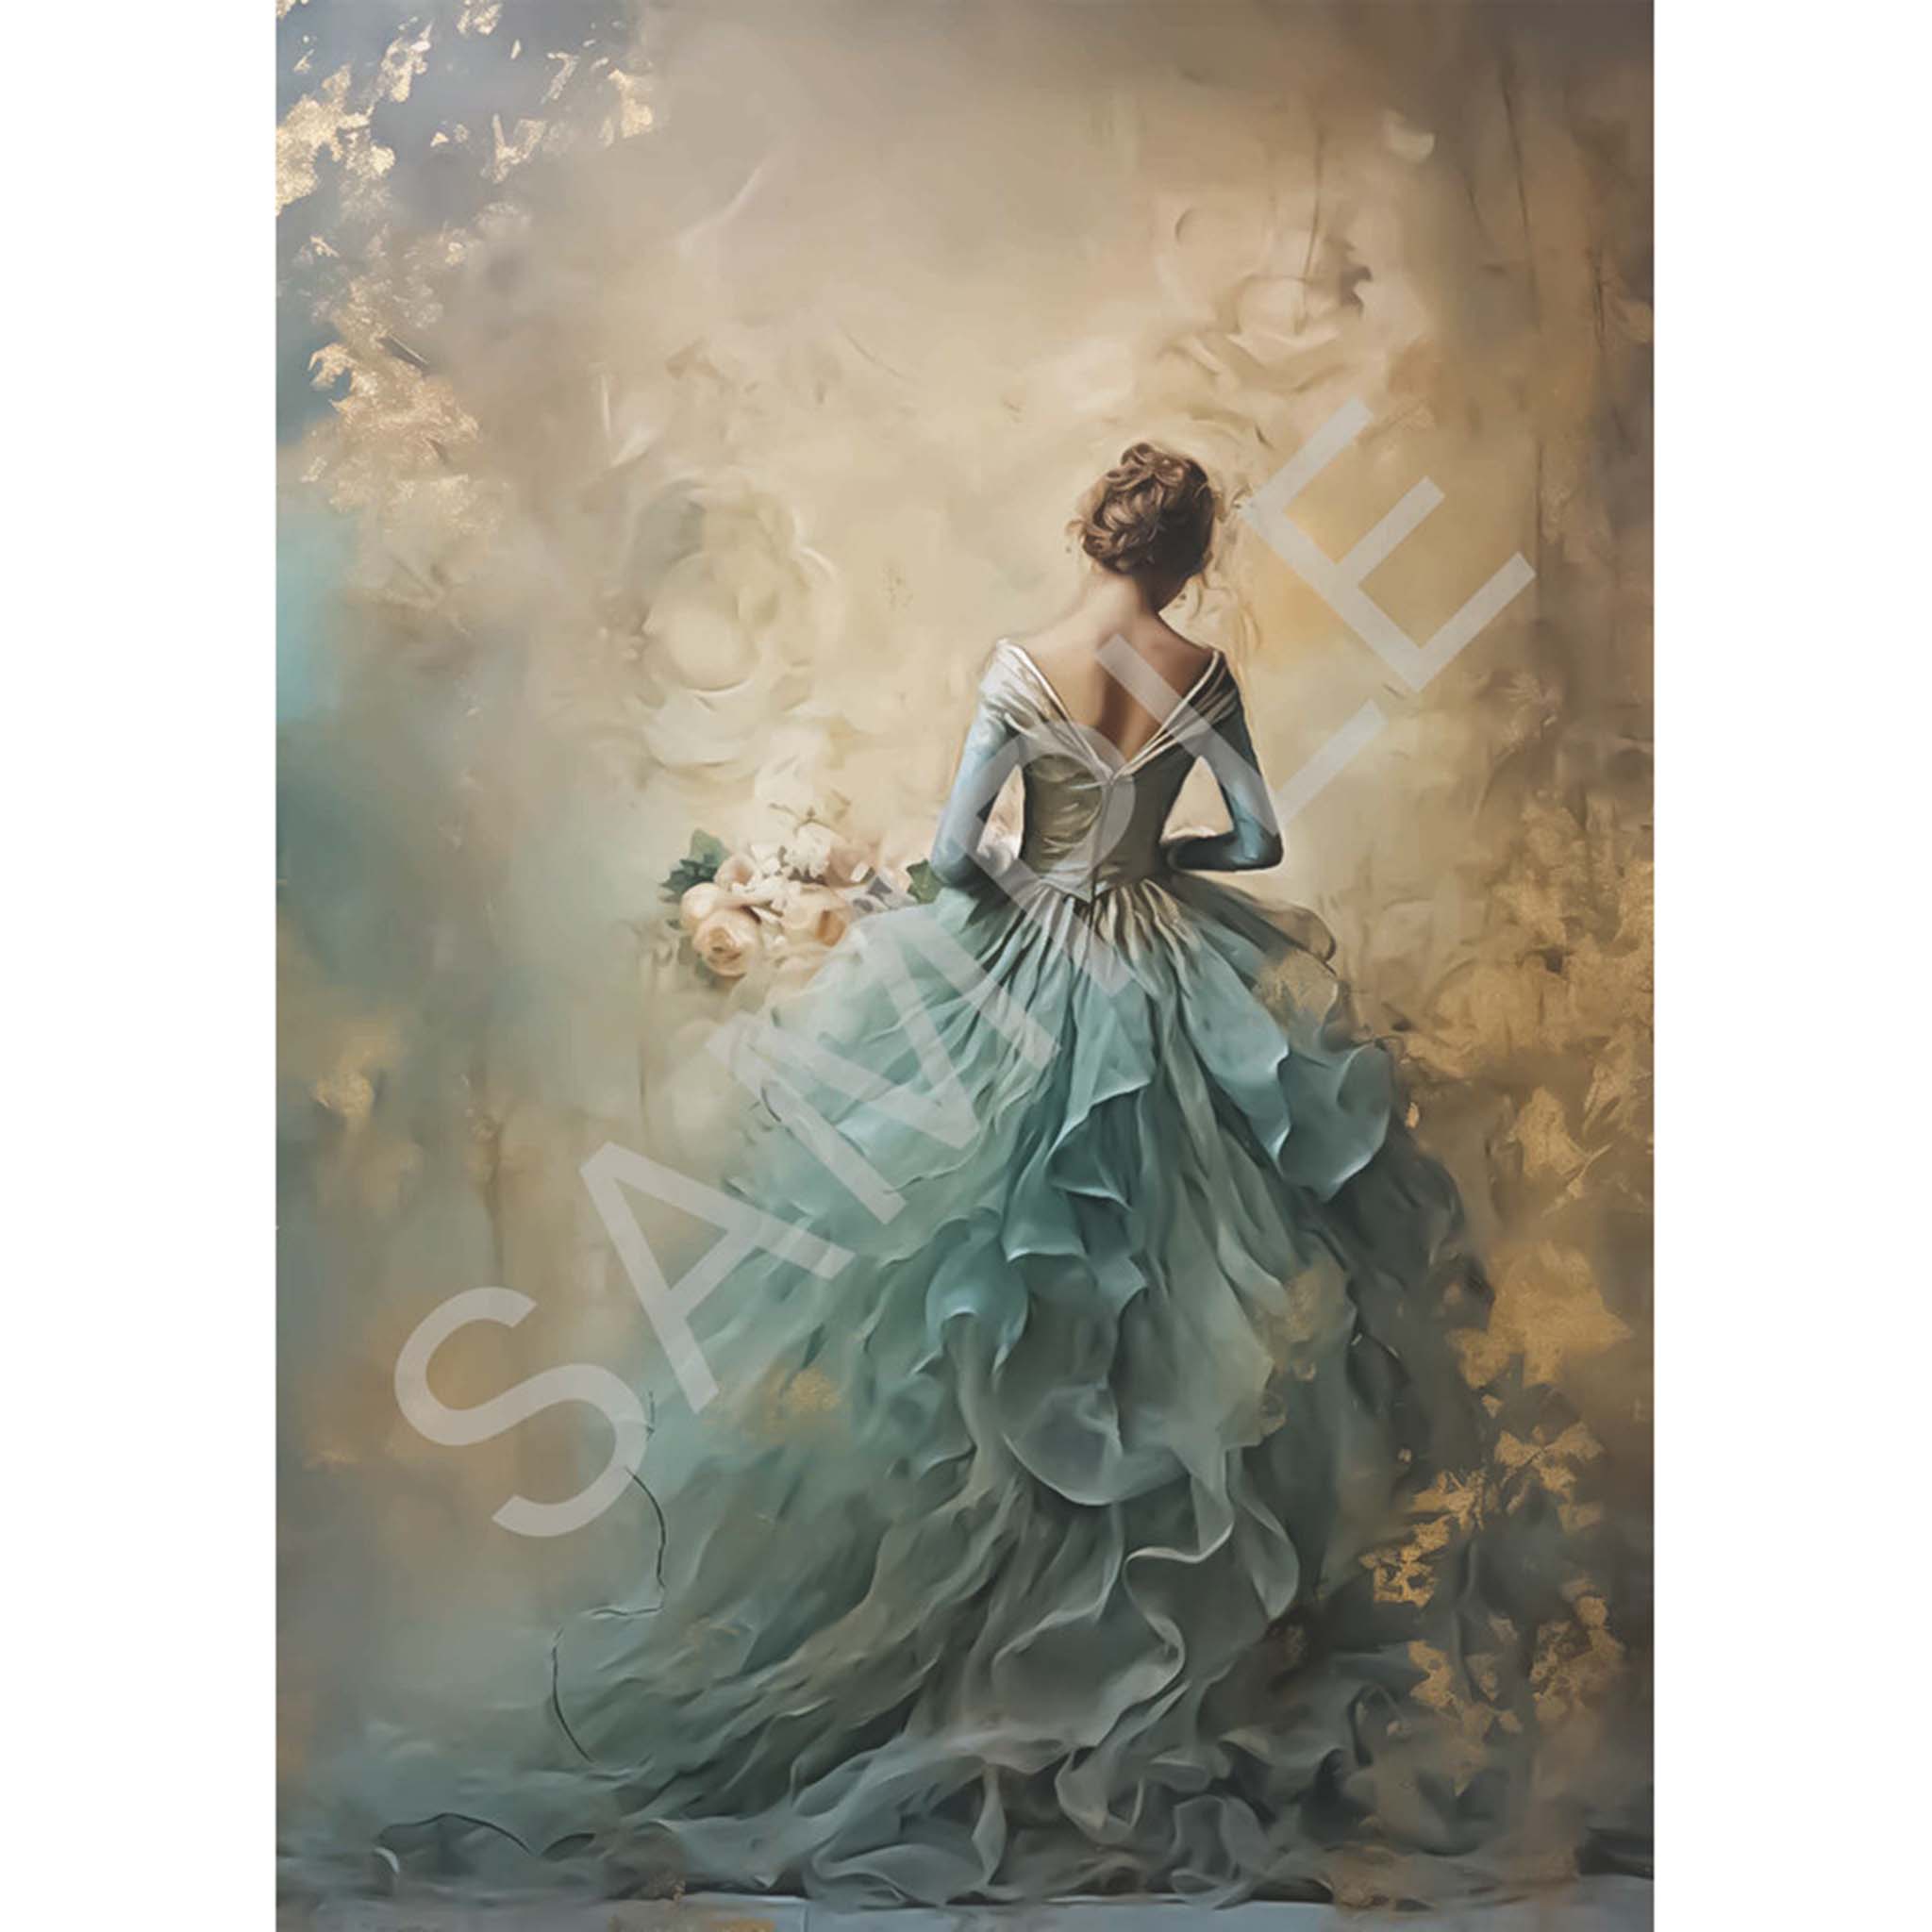 A4 rice paper design of a dreamy scene featuring a woman in a blue dress walking away into the background. White borders on the sides.